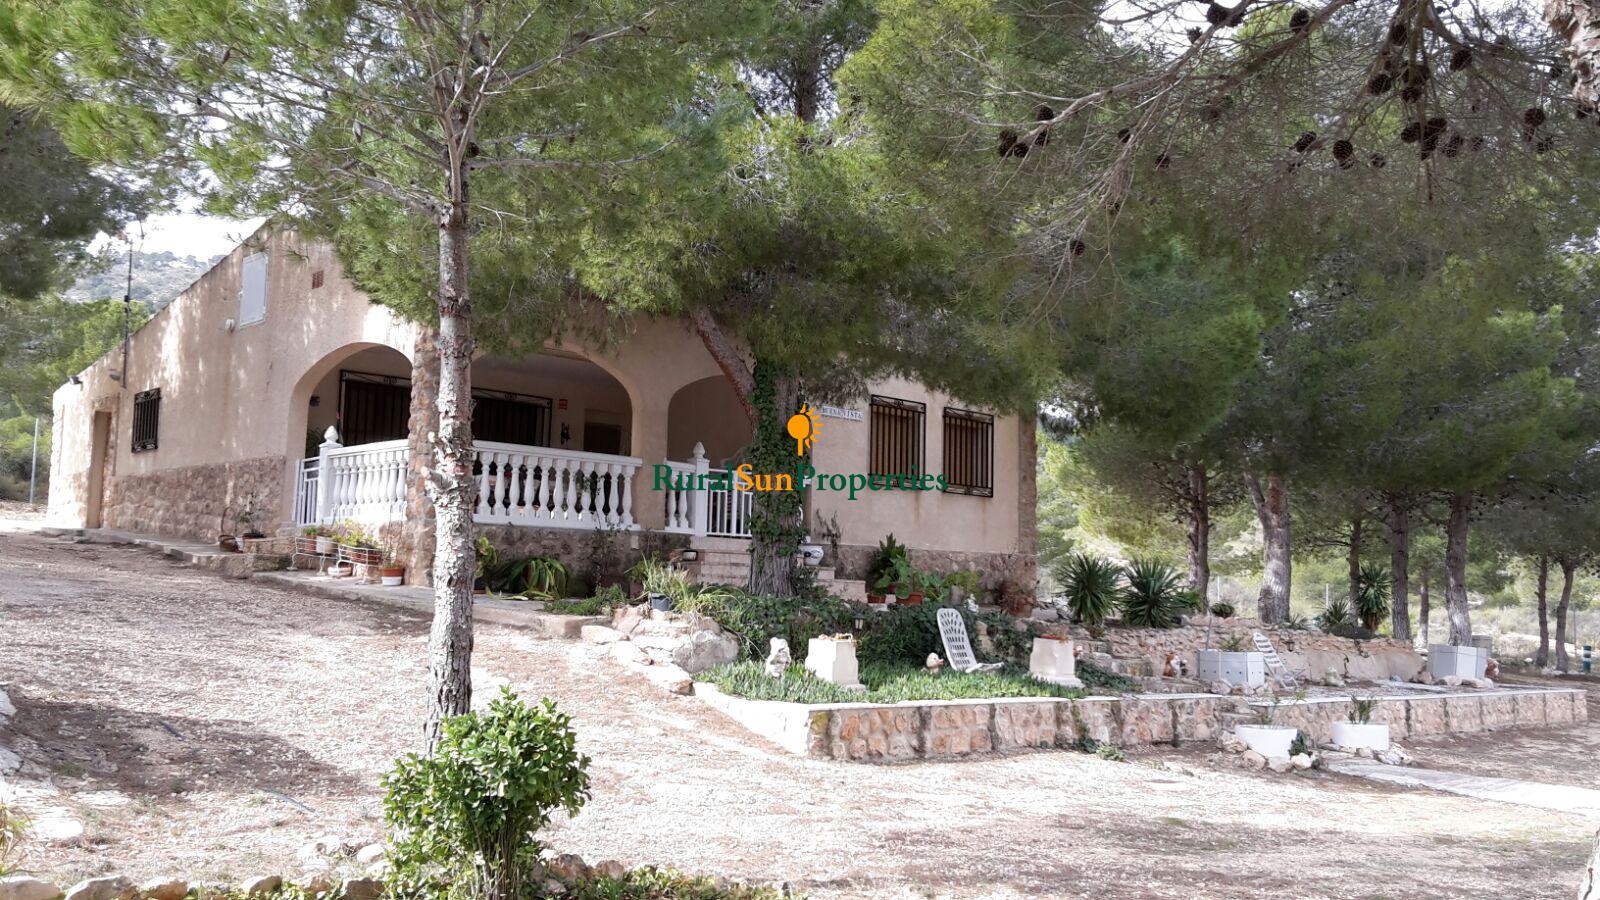 Sale country house/finca for sale in Yecla. 10,000 sq.m plot